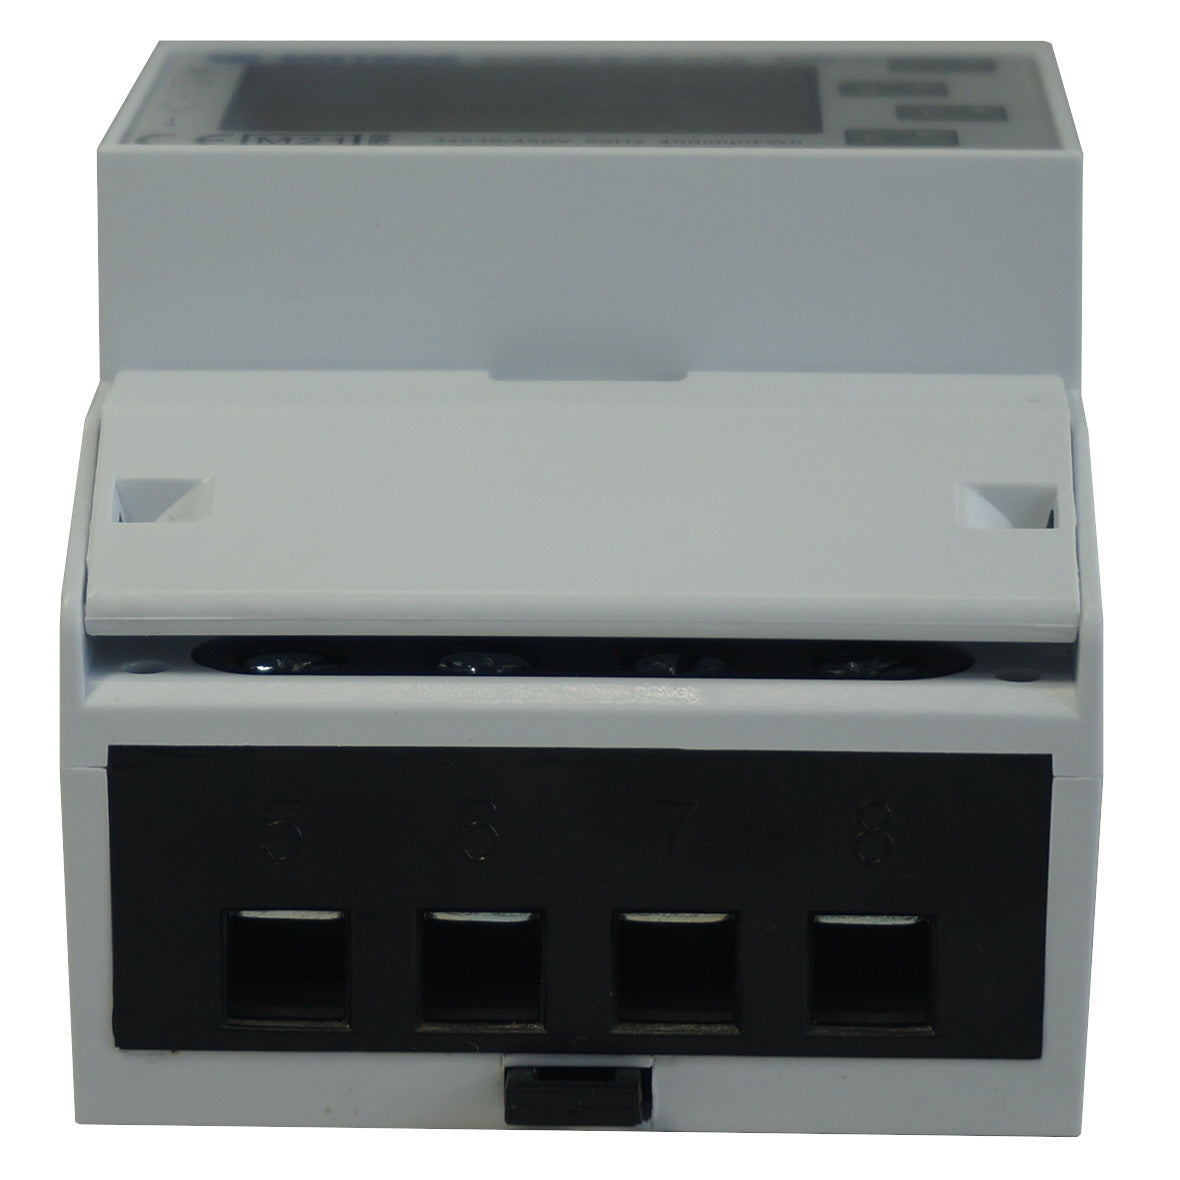 SDM630Modbus-MID-V2-CL1, DIN Rail Mount kWh Meter, 3 Phase, Class 1, 100Amp Direct Connect, w/ 2 x pulse outputs and RS485 Modbus RTU Comms, MID Approved